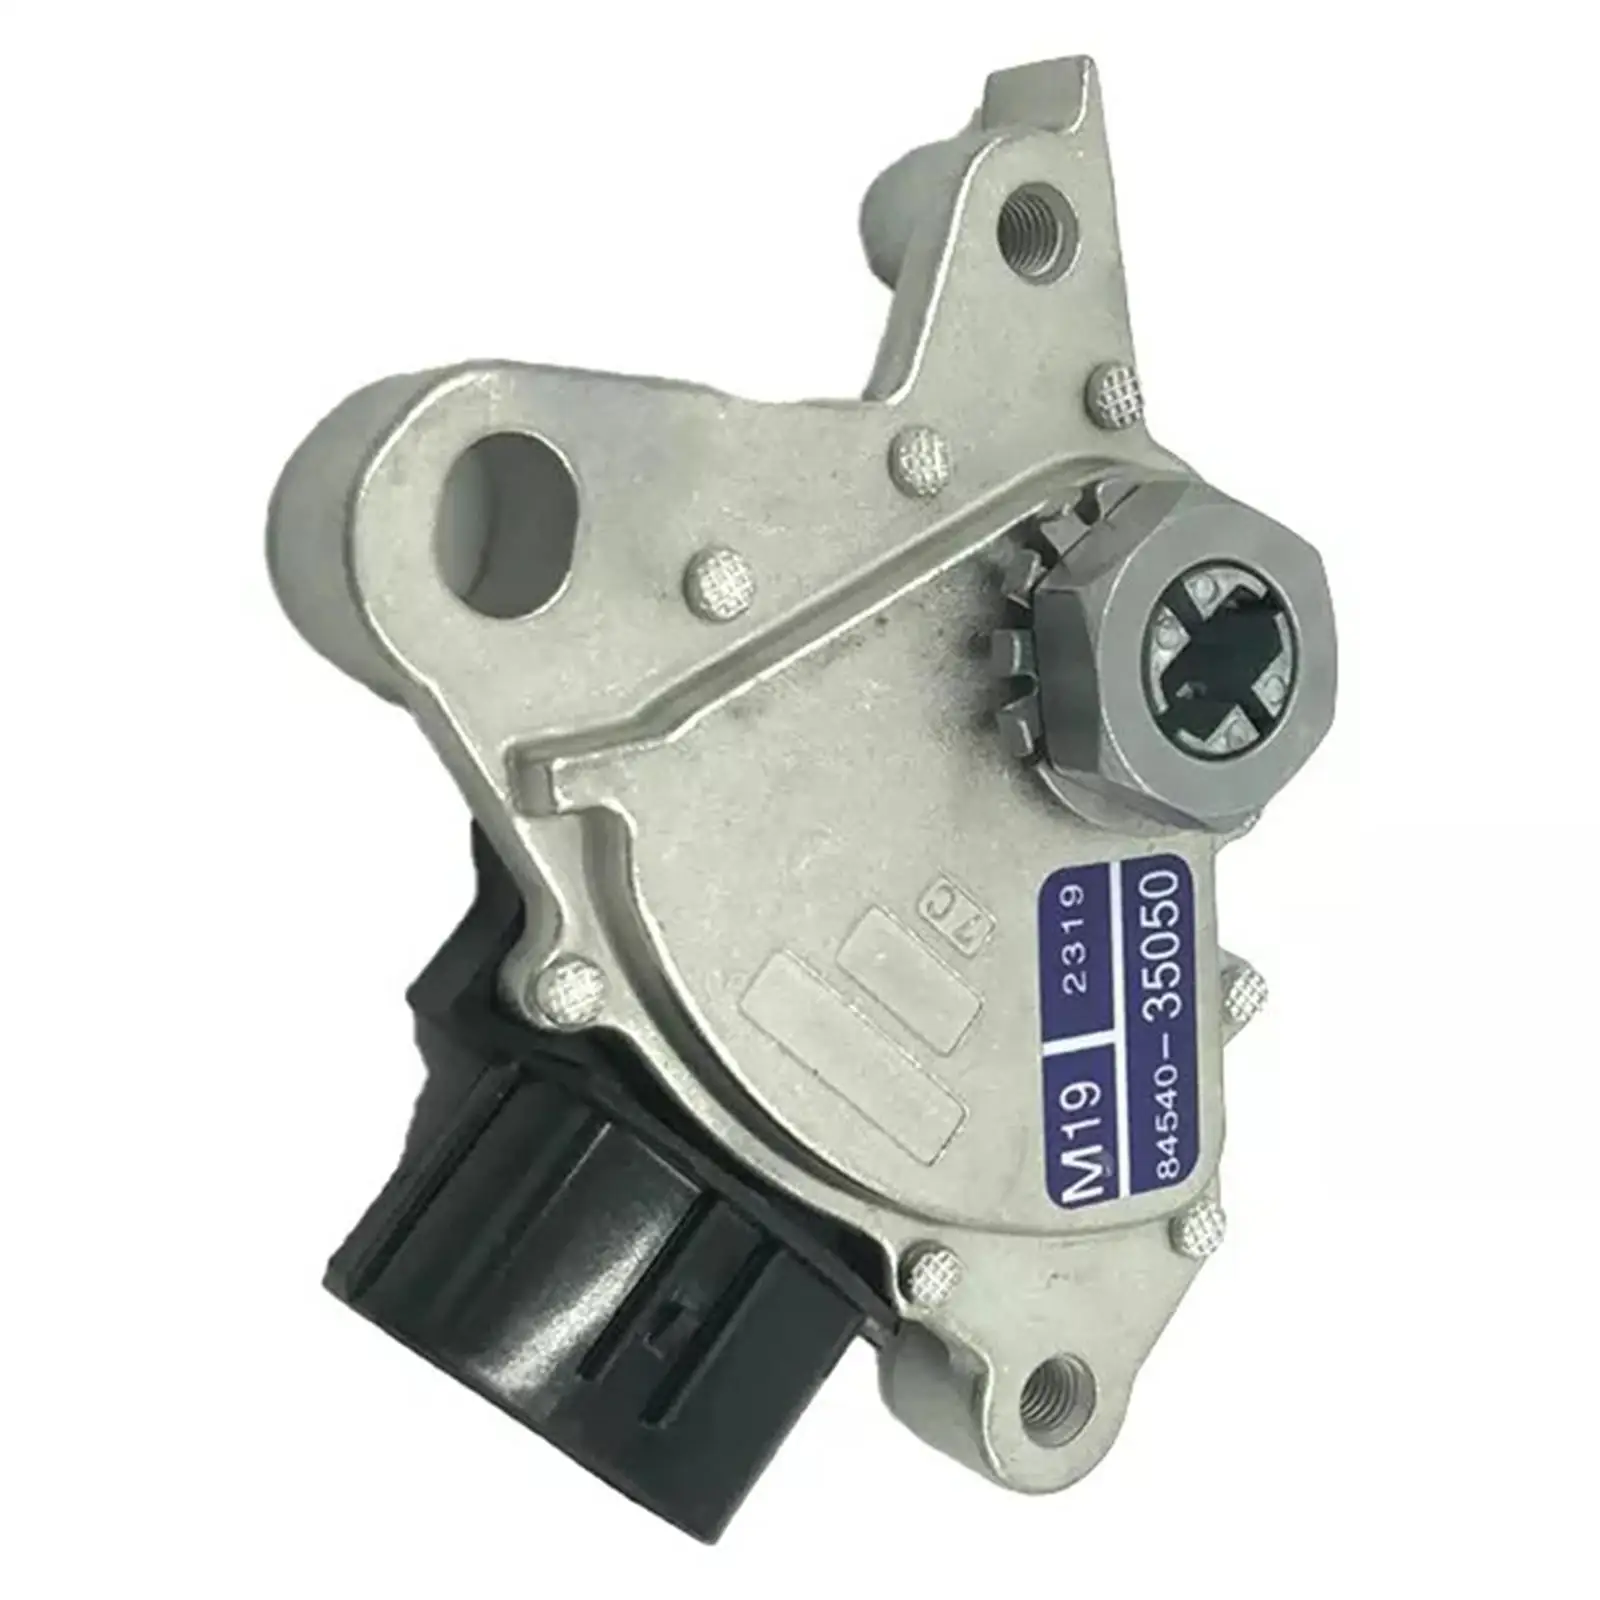 SW4984 Neutral Start Switch for Toyota Tacoma Replaces Spare Parts